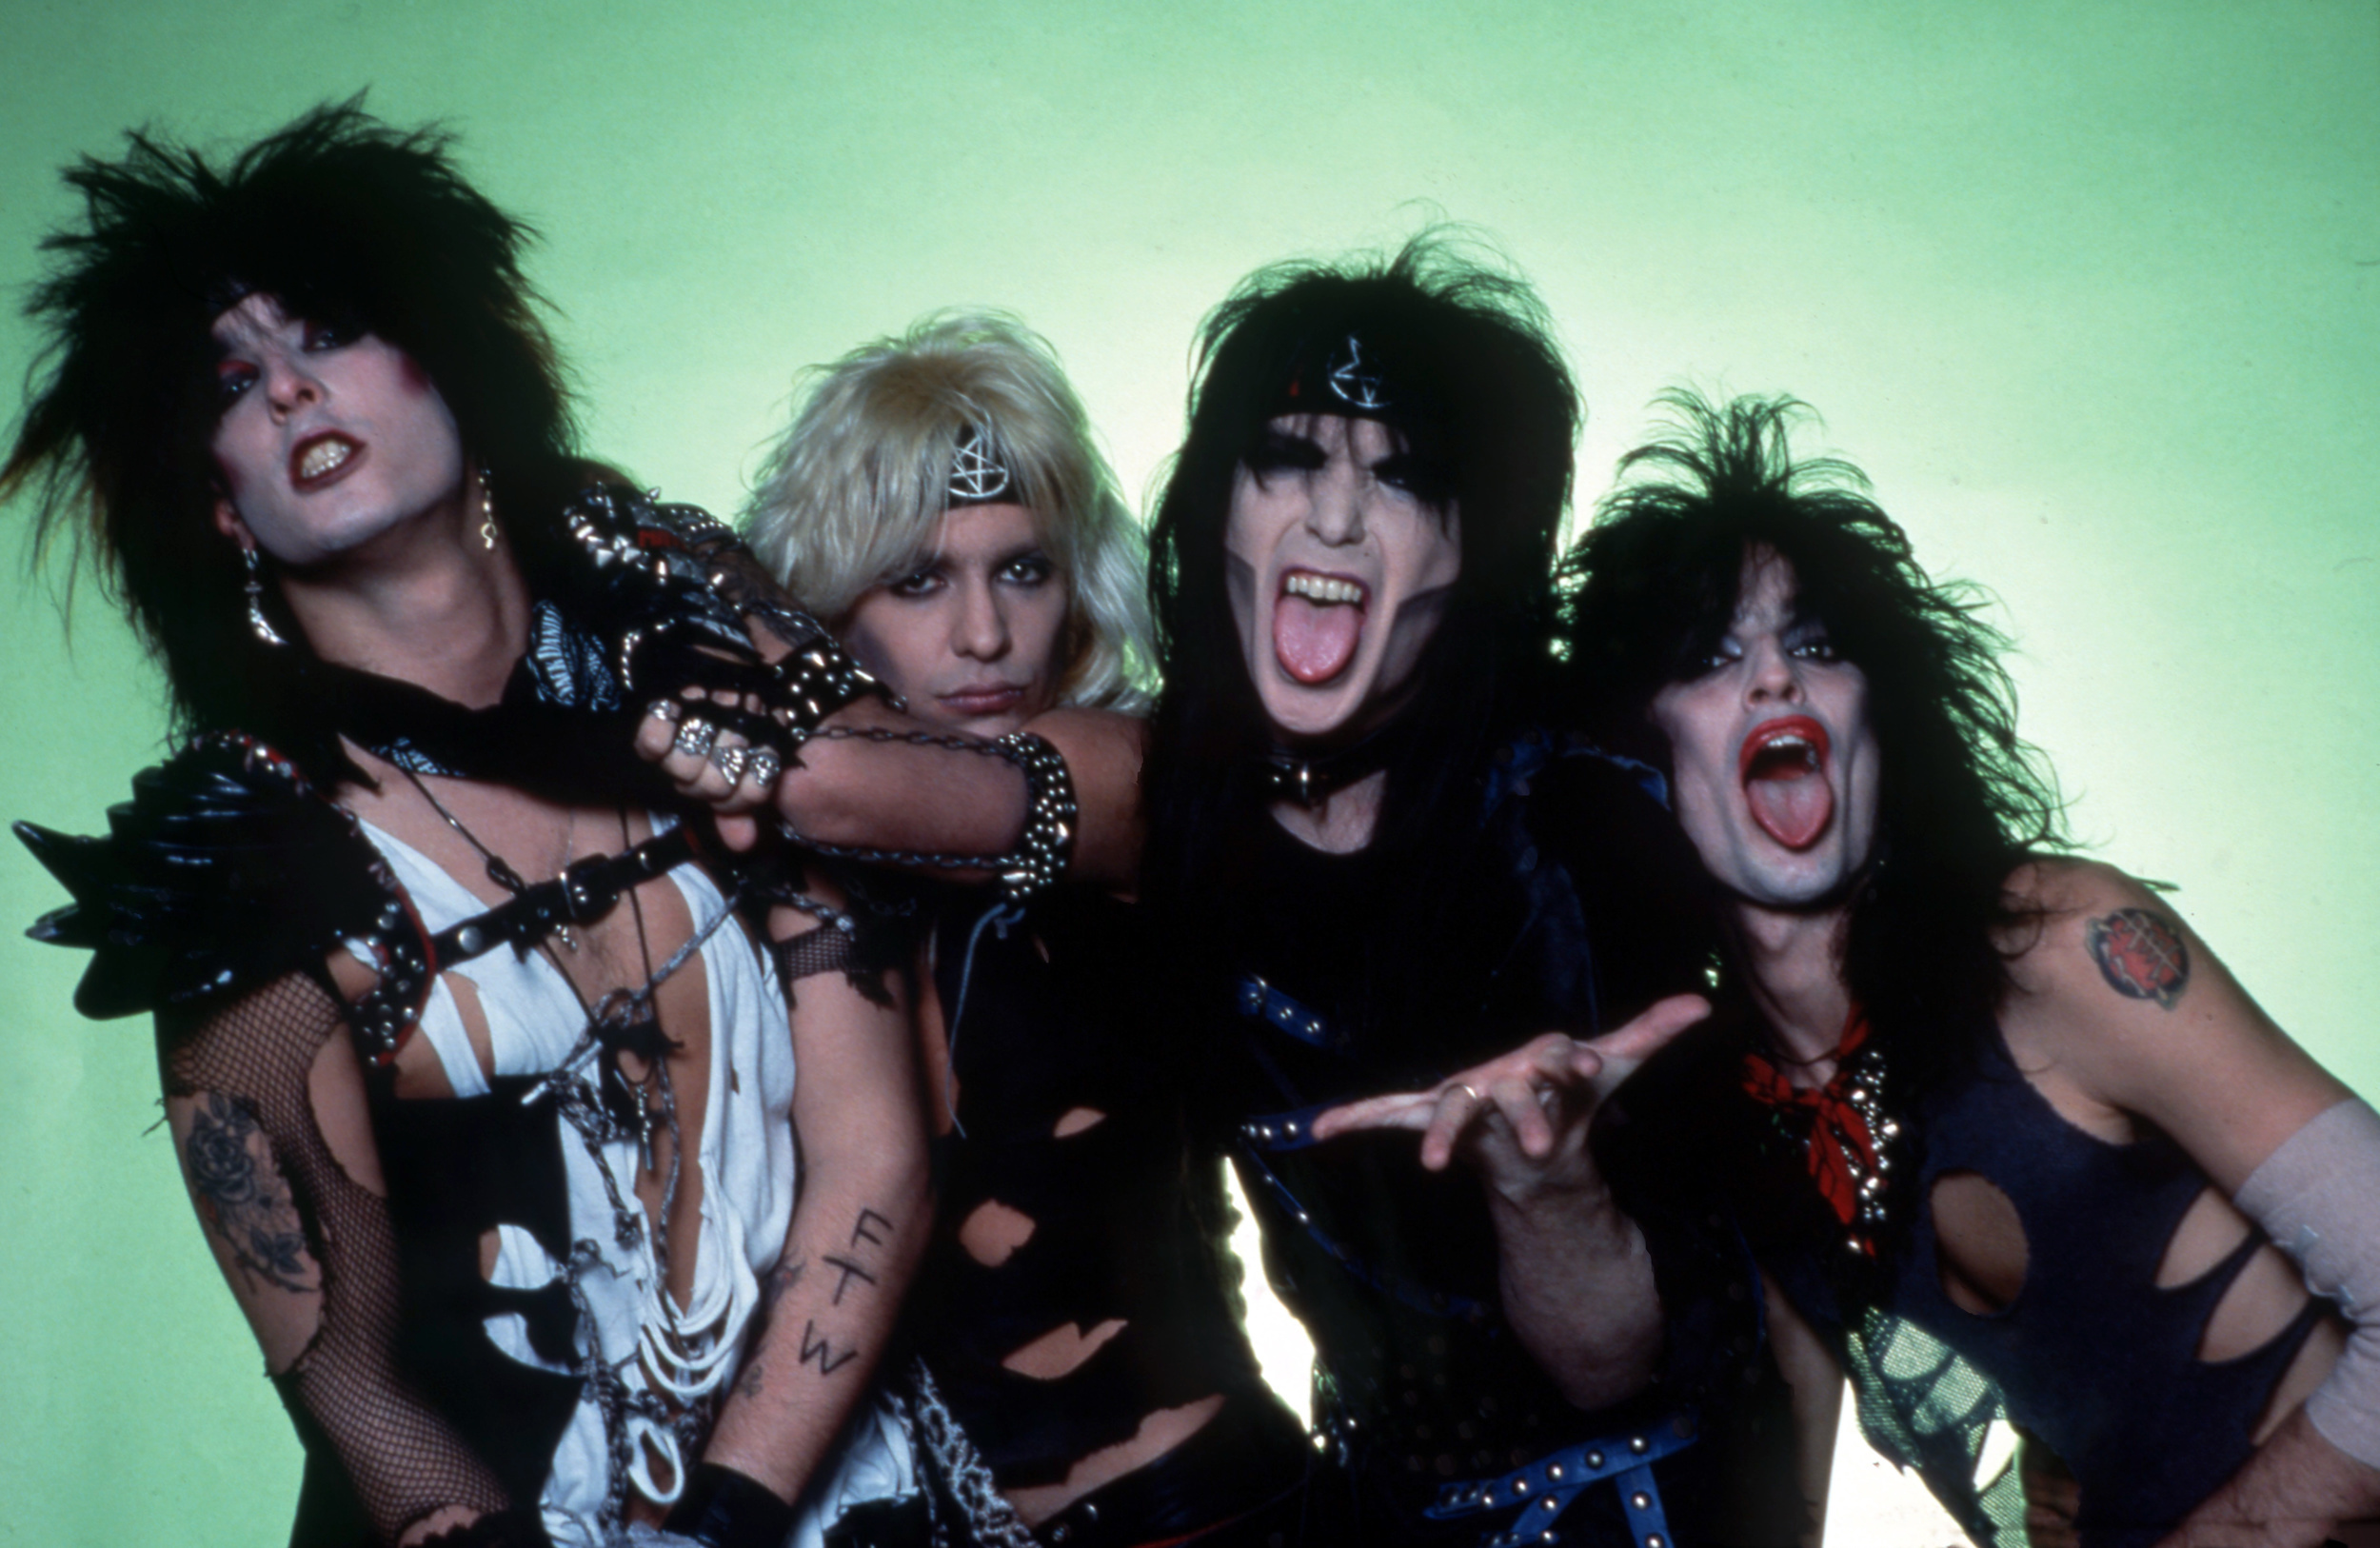 <p>The hair, or glam, metal bands of the 1980s remain one of the true guilty pleasures in music history. The hair spray, makeup, and catchy pop tunes touched up with distortion were made for MTV.</p><p>Though there really wasn't much substance to the music, the scene was popular to the mainstream. We've decided to rank our 20 hair metal bands of all time. </p><p>But before we go on, bands like Def Leppard, Kiss, Scorpions, Whitesnake, Extreme, and Tesla are not on this list. While, yes, some of these groups made massively successful pop-tinged metal albums during the '80s, they were either already successfully established hard-rock acts before this time and went for some easy money or were unjustly lumped into the genre thanks to MTV.</p><p>With that said, here we go. </p>